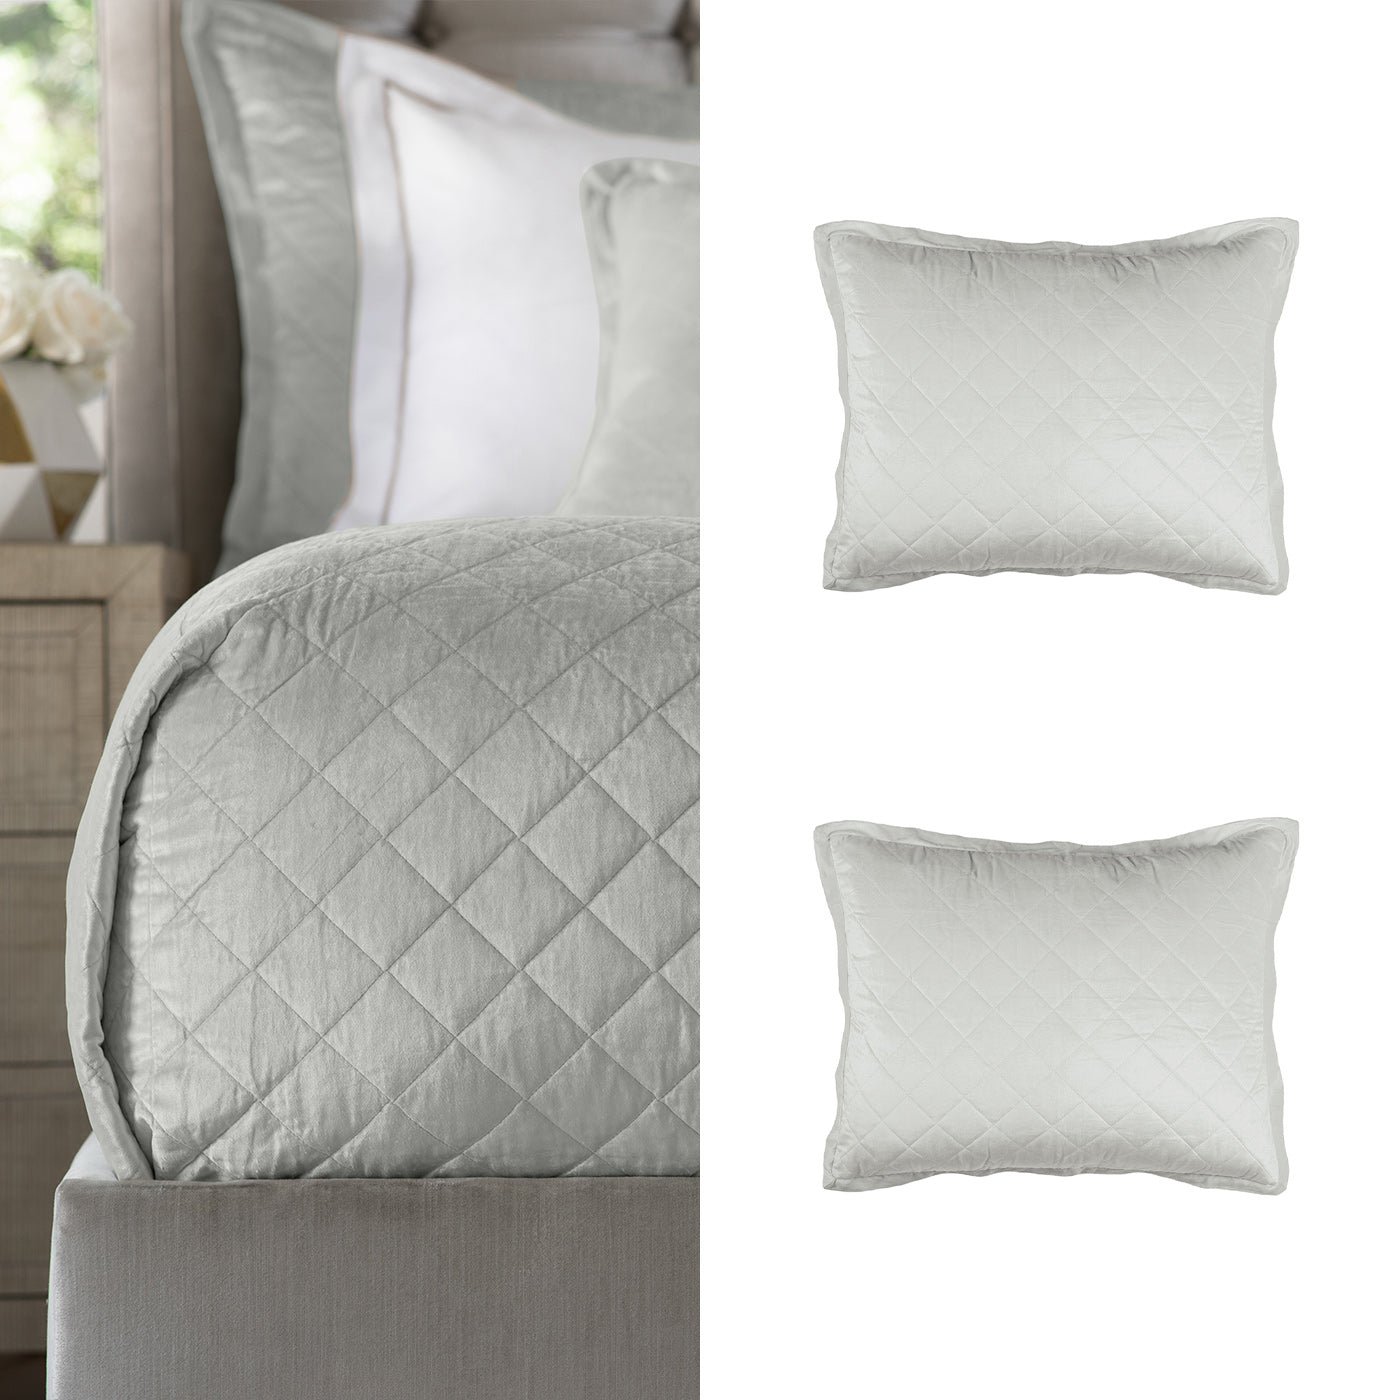 Chloe Coverlet Set Celadon Queen (Coverlet & Two Standard Shams - No Inserts)